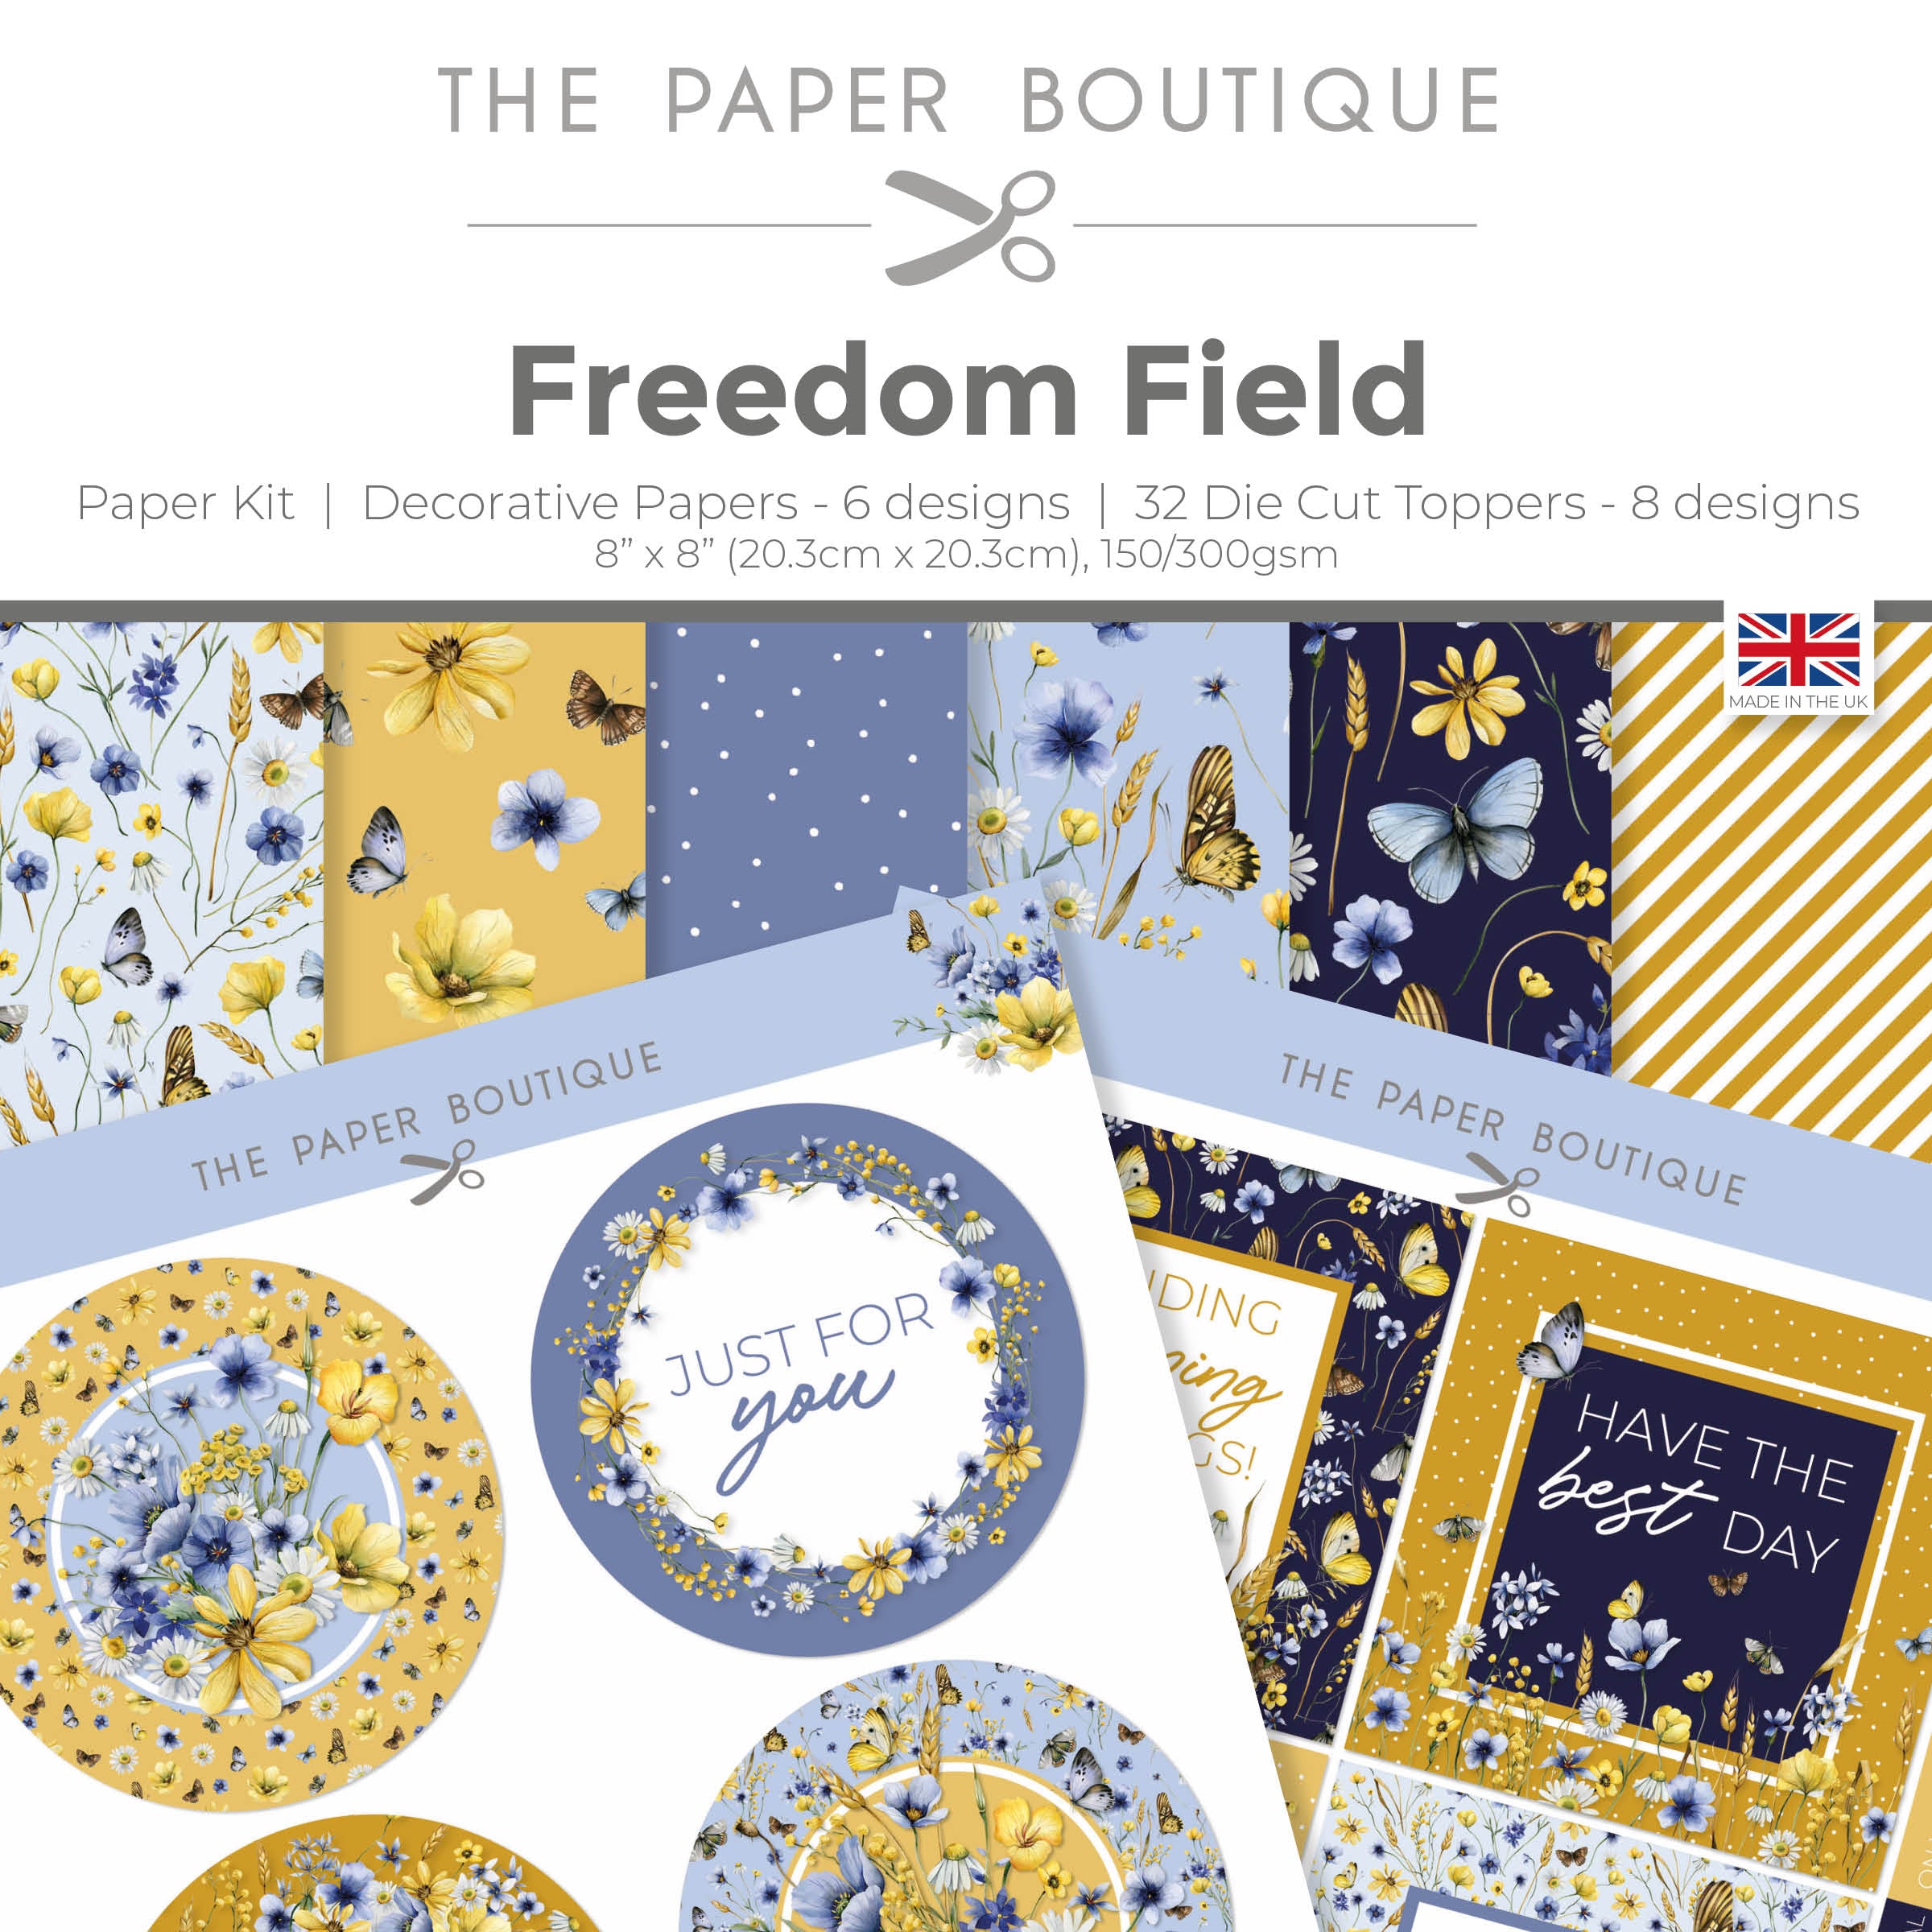 The Paper Boutique Freedom Field Paper Kit